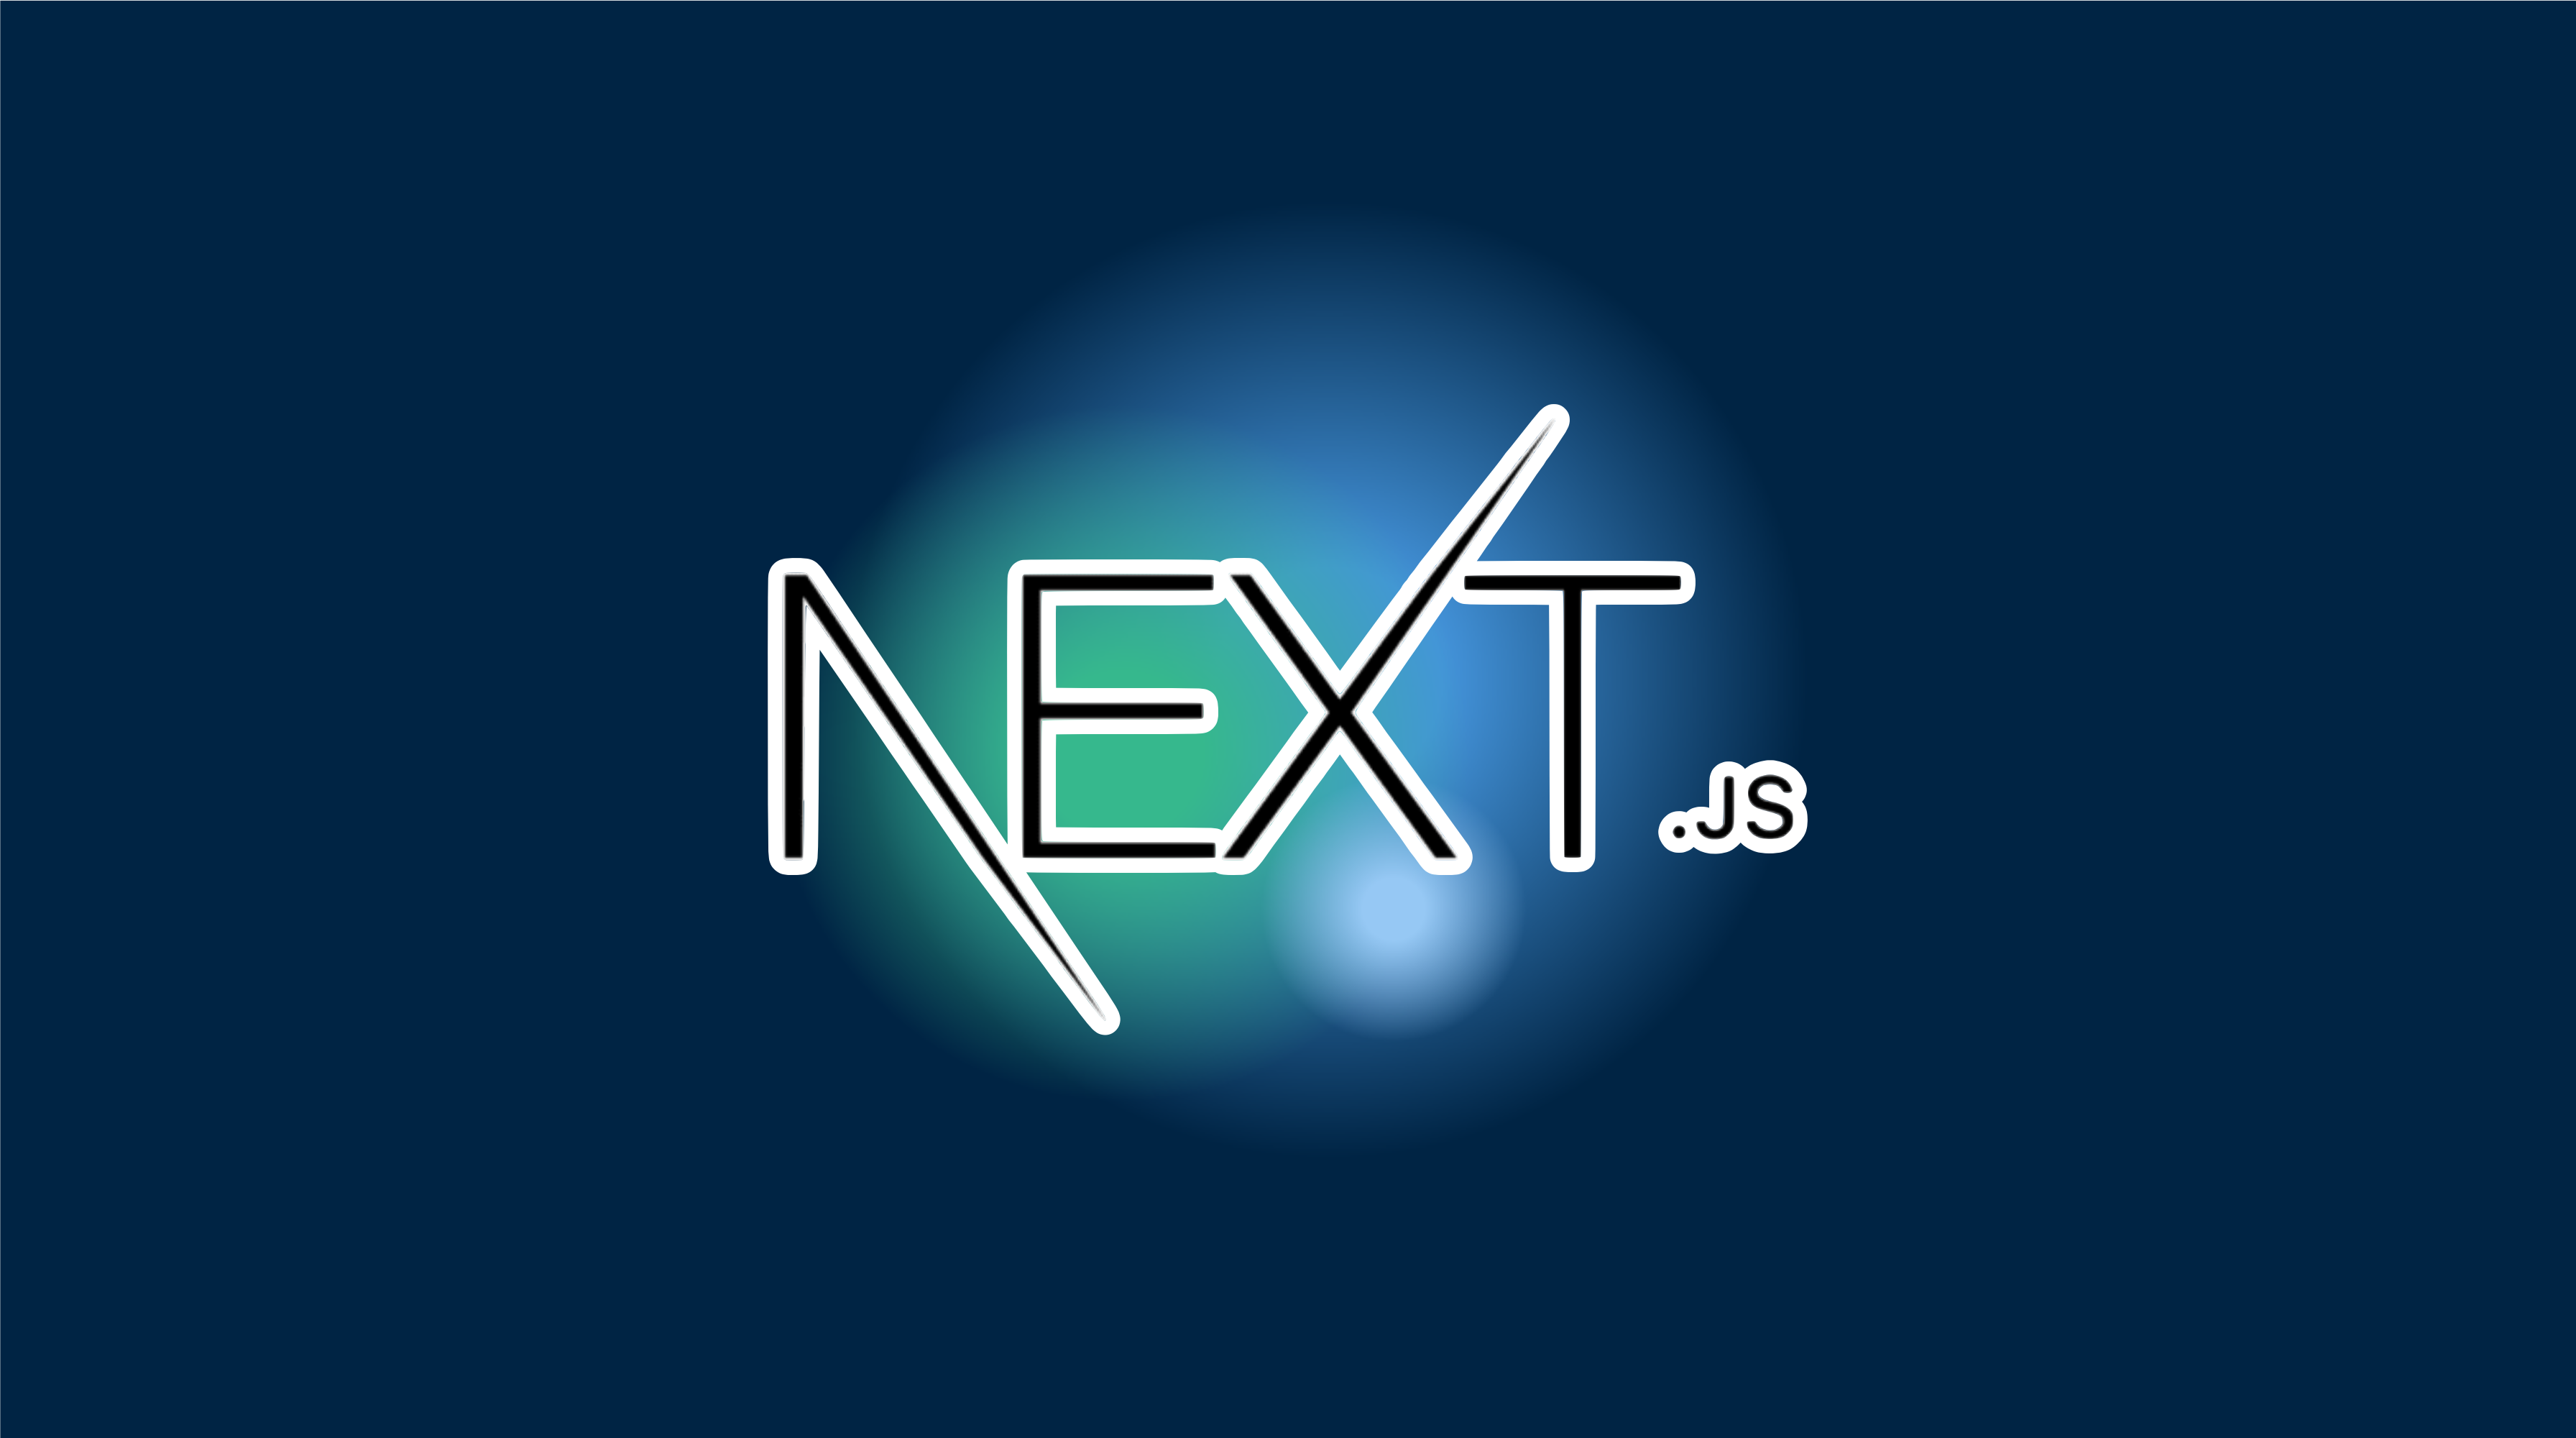 Creating Mobile Apps with Next.js and Capacitor.